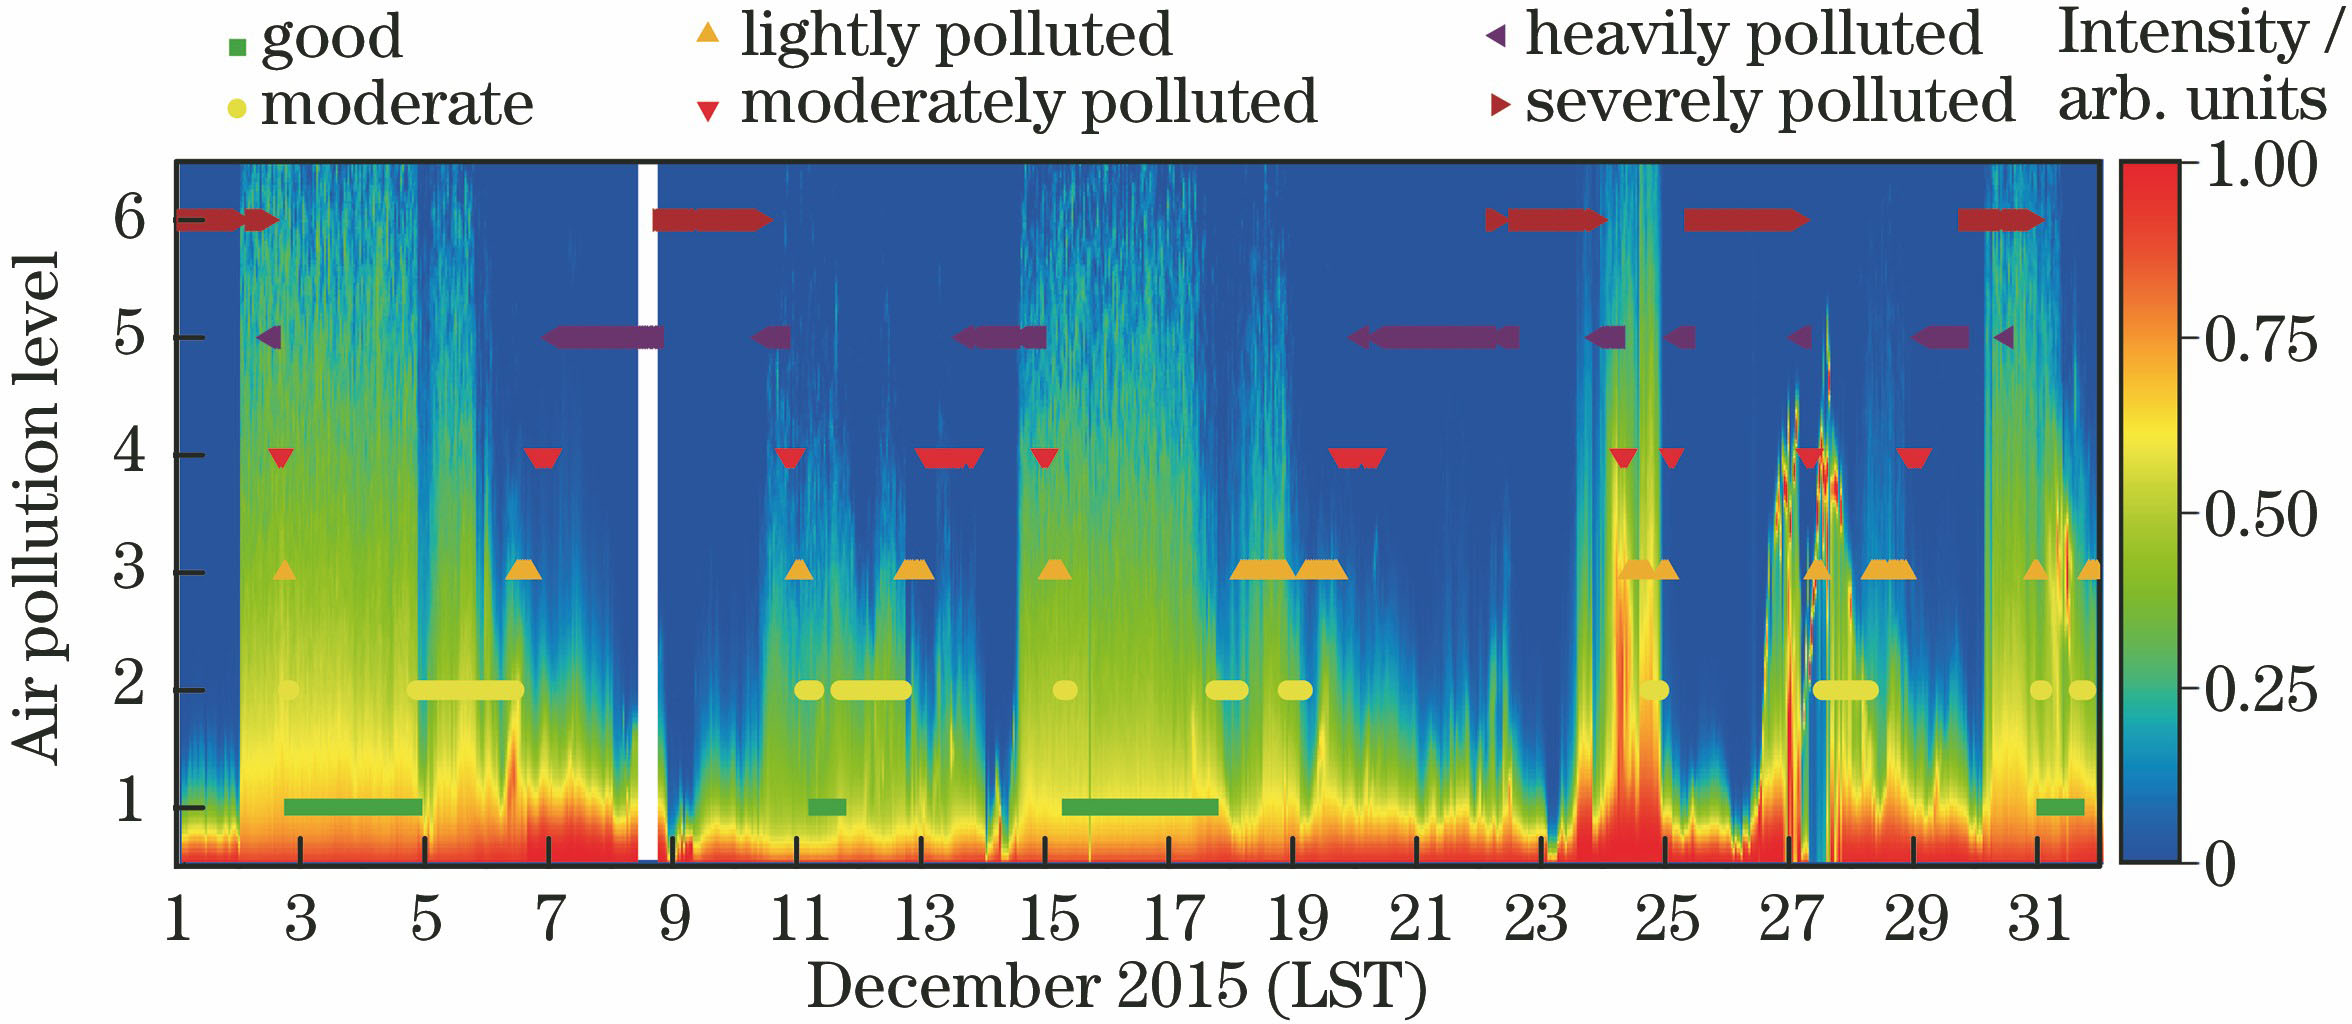 Spatial and temporal distribution of the echo signal monitored by lidar and variation trend of air pollution index